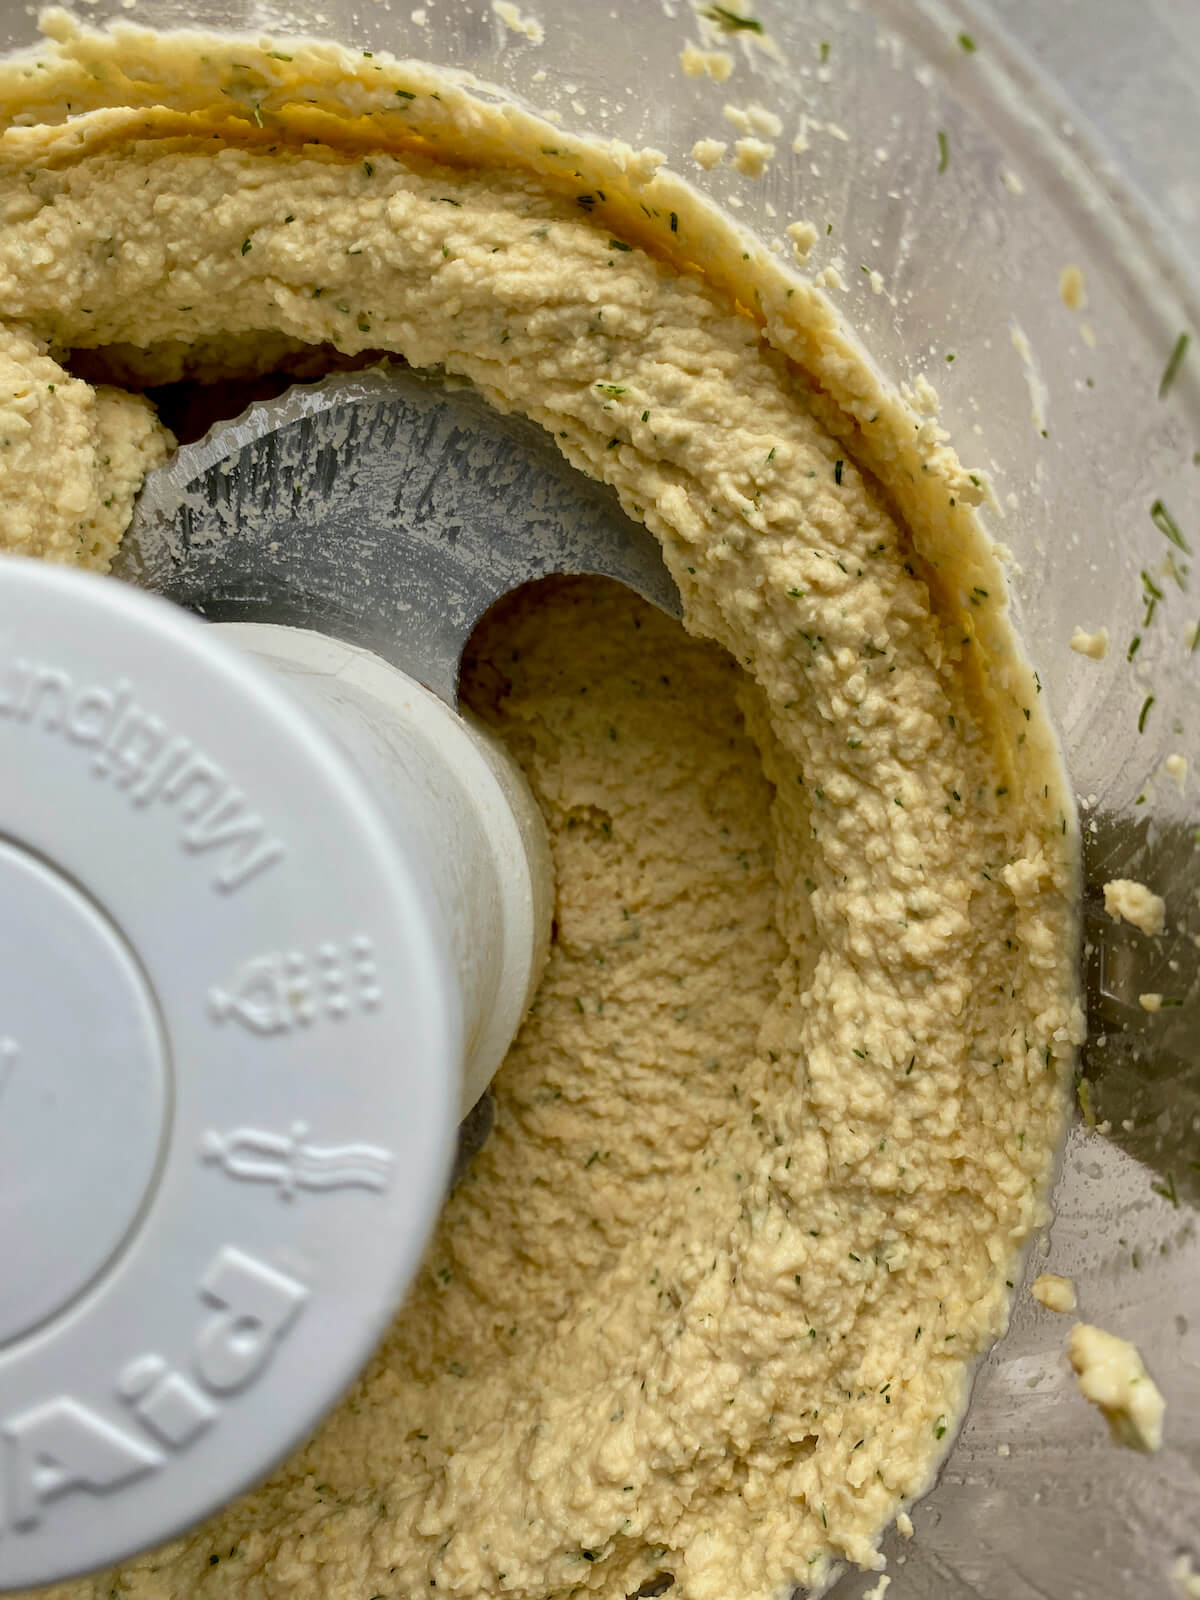 Finished lemon dill hummus in the bowl of a food processor.